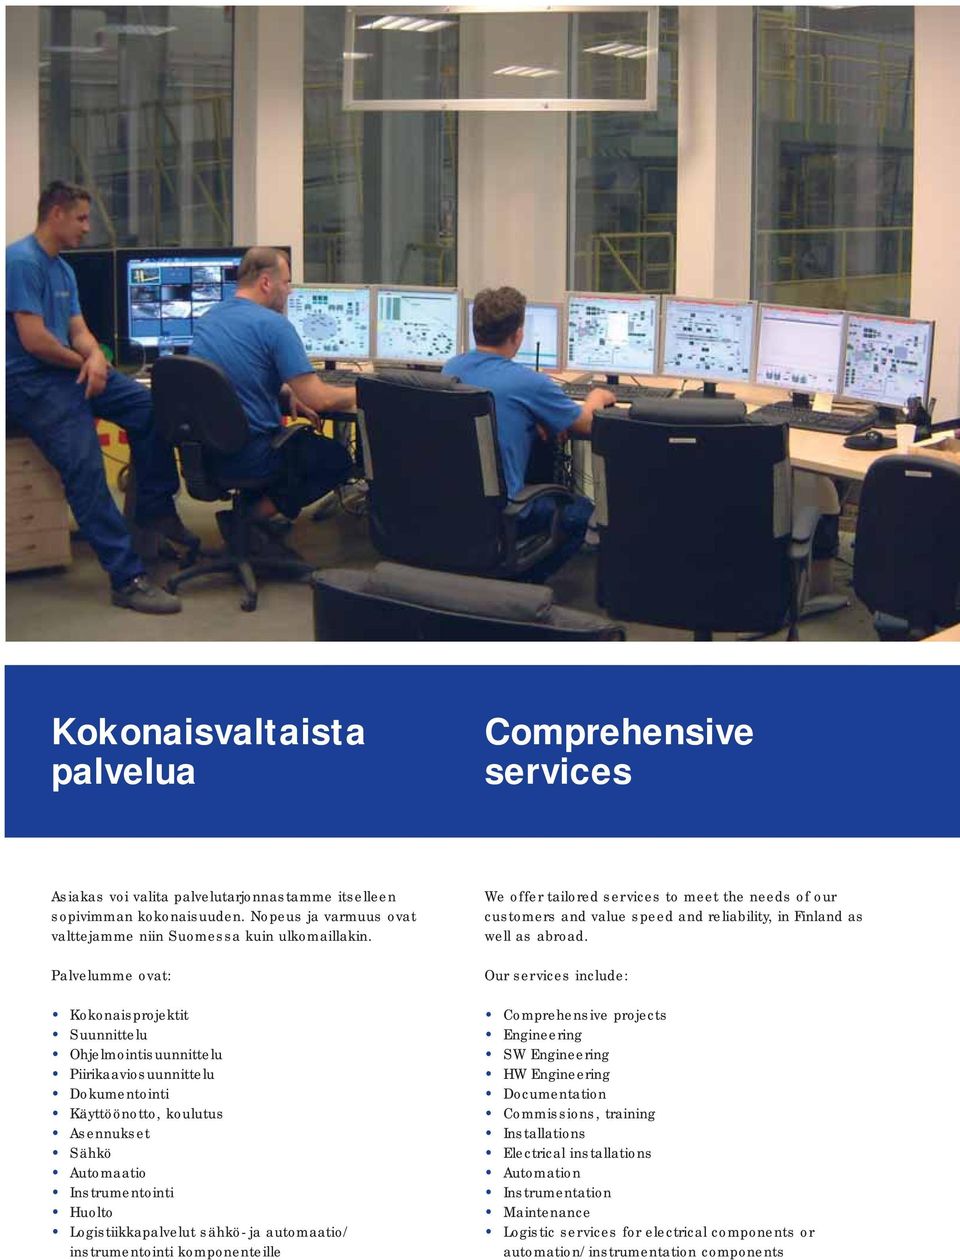 Logistiikkapalvelut sähkö- ja automaatio/ instrumentointi komponenteille We offer tailored services to meet the needs of our customers and value speed and reliability, in Finland as well as abroad.